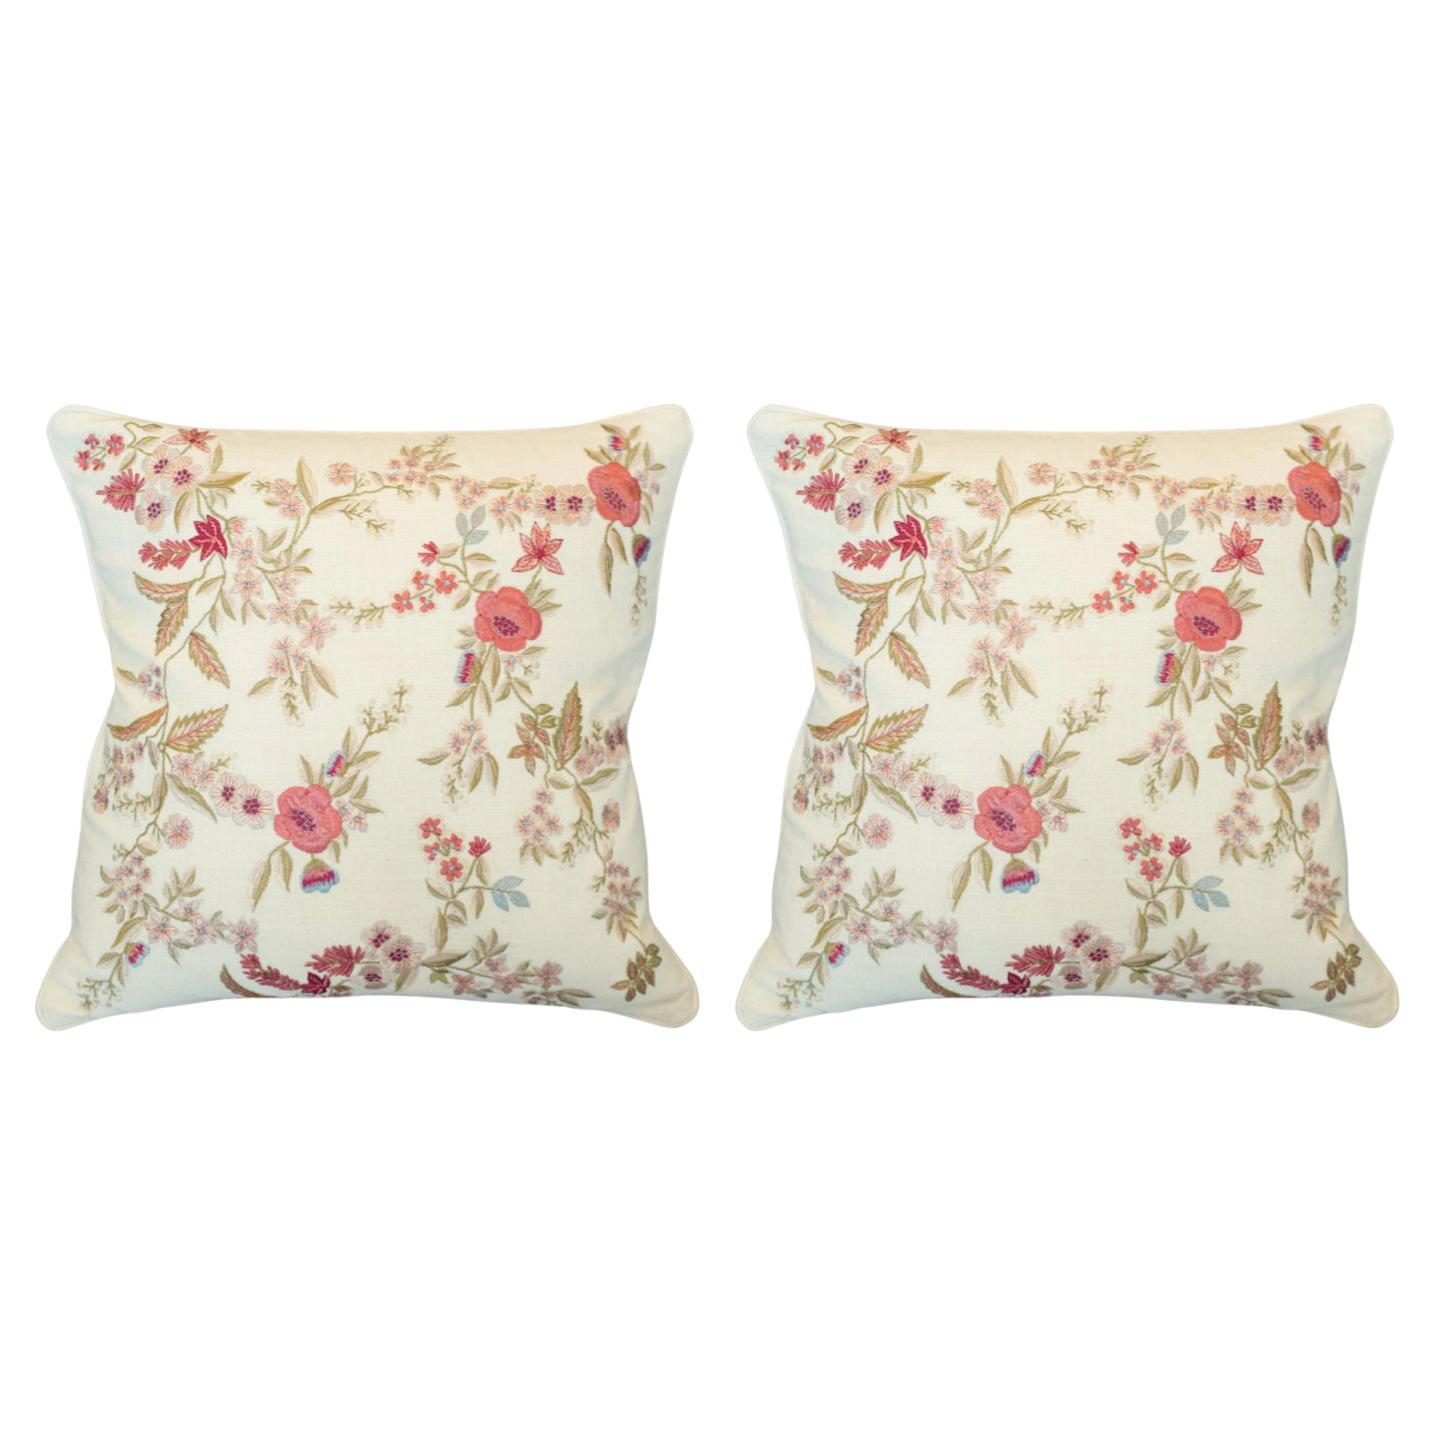 Contemporary Pair of Cotton Pillows with Ornate Floral Embroidery For Sale